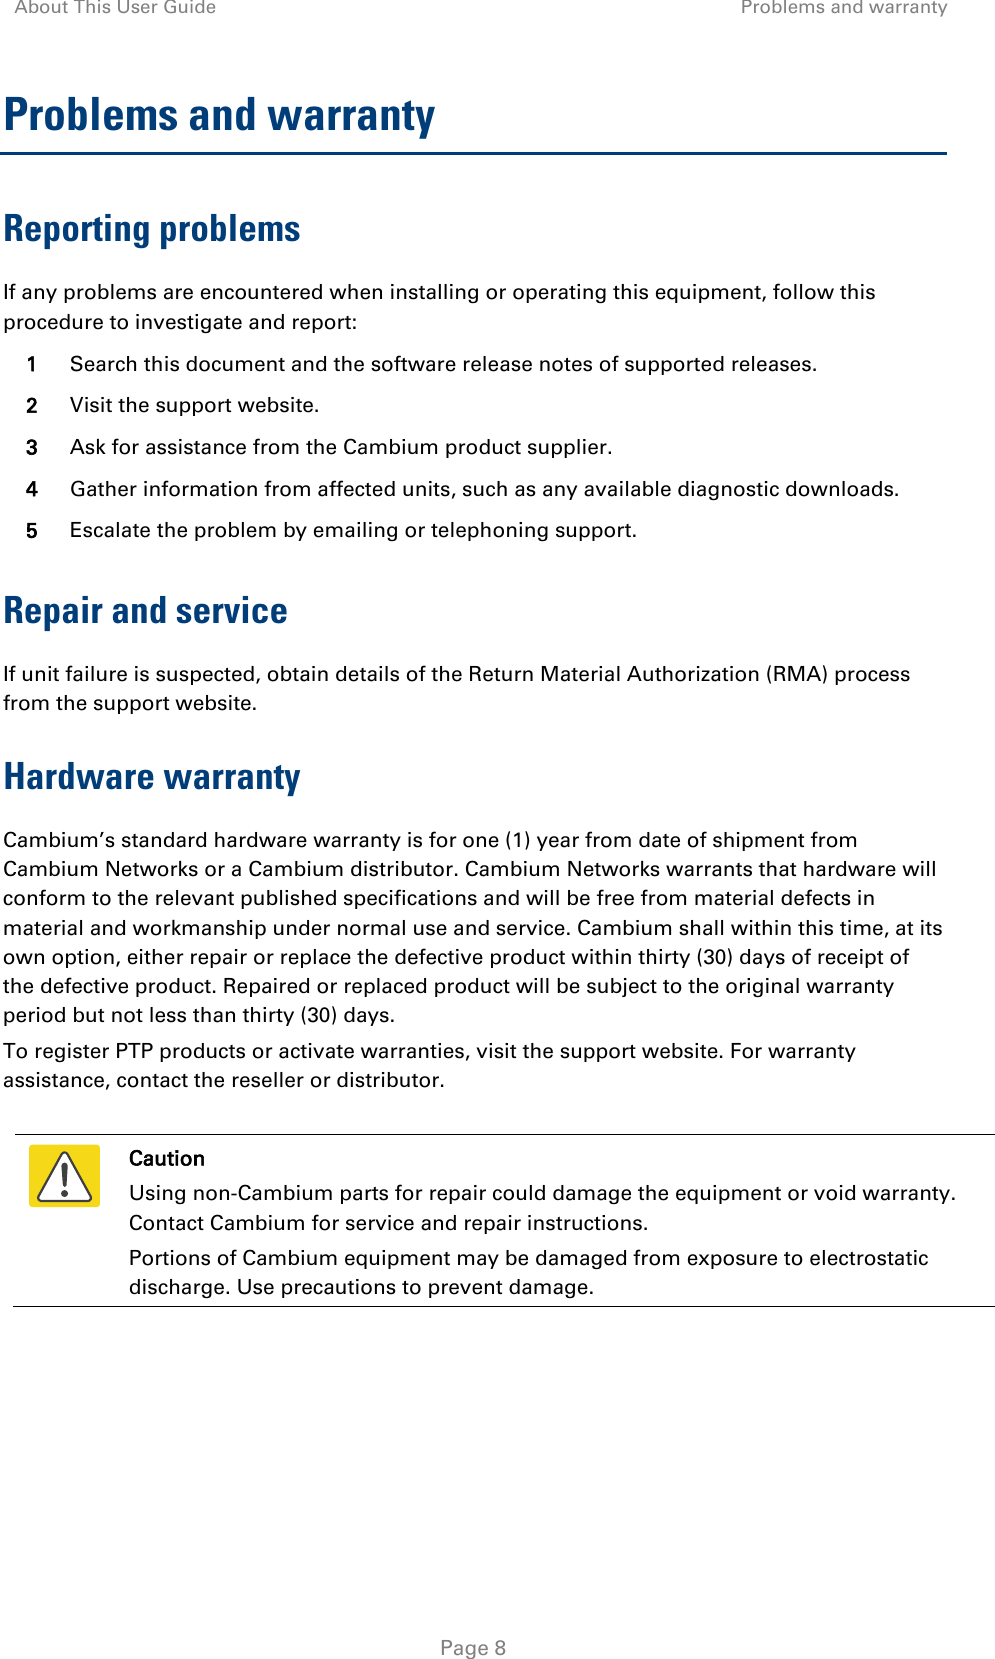 About This User Guide Problems and warranty   Page 8 Problems and warranty Reporting problems If any problems are encountered when installing or operating this equipment, follow this procedure to investigate and report: 1 Search this document and the software release notes of supported releases. 2 Visit the support website. 3 Ask for assistance from the Cambium product supplier. 4 Gather information from affected units, such as any available diagnostic downloads. 5 Escalate the problem by emailing or telephoning support. Repair and service If unit failure is suspected, obtain details of the Return Material Authorization (RMA) process from the support website. Hardware warranty Cambium’s standard hardware warranty is for one (1) year from date of shipment from Cambium Networks or a Cambium distributor. Cambium Networks warrants that hardware will conform to the relevant published specifications and will be free from material defects in material and workmanship under normal use and service. Cambium shall within this time, at its own option, either repair or replace the defective product within thirty (30) days of receipt of the defective product. Repaired or replaced product will be subject to the original warranty period but not less than thirty (30) days. To register PTP products or activate warranties, visit the support website. For warranty assistance, contact the reseller or distributor.   Caution Using non-Cambium parts for repair could damage the equipment or void warranty. Contact Cambium for service and repair instructions. Portions of Cambium equipment may be damaged from exposure to electrostatic discharge. Use precautions to prevent damage.  